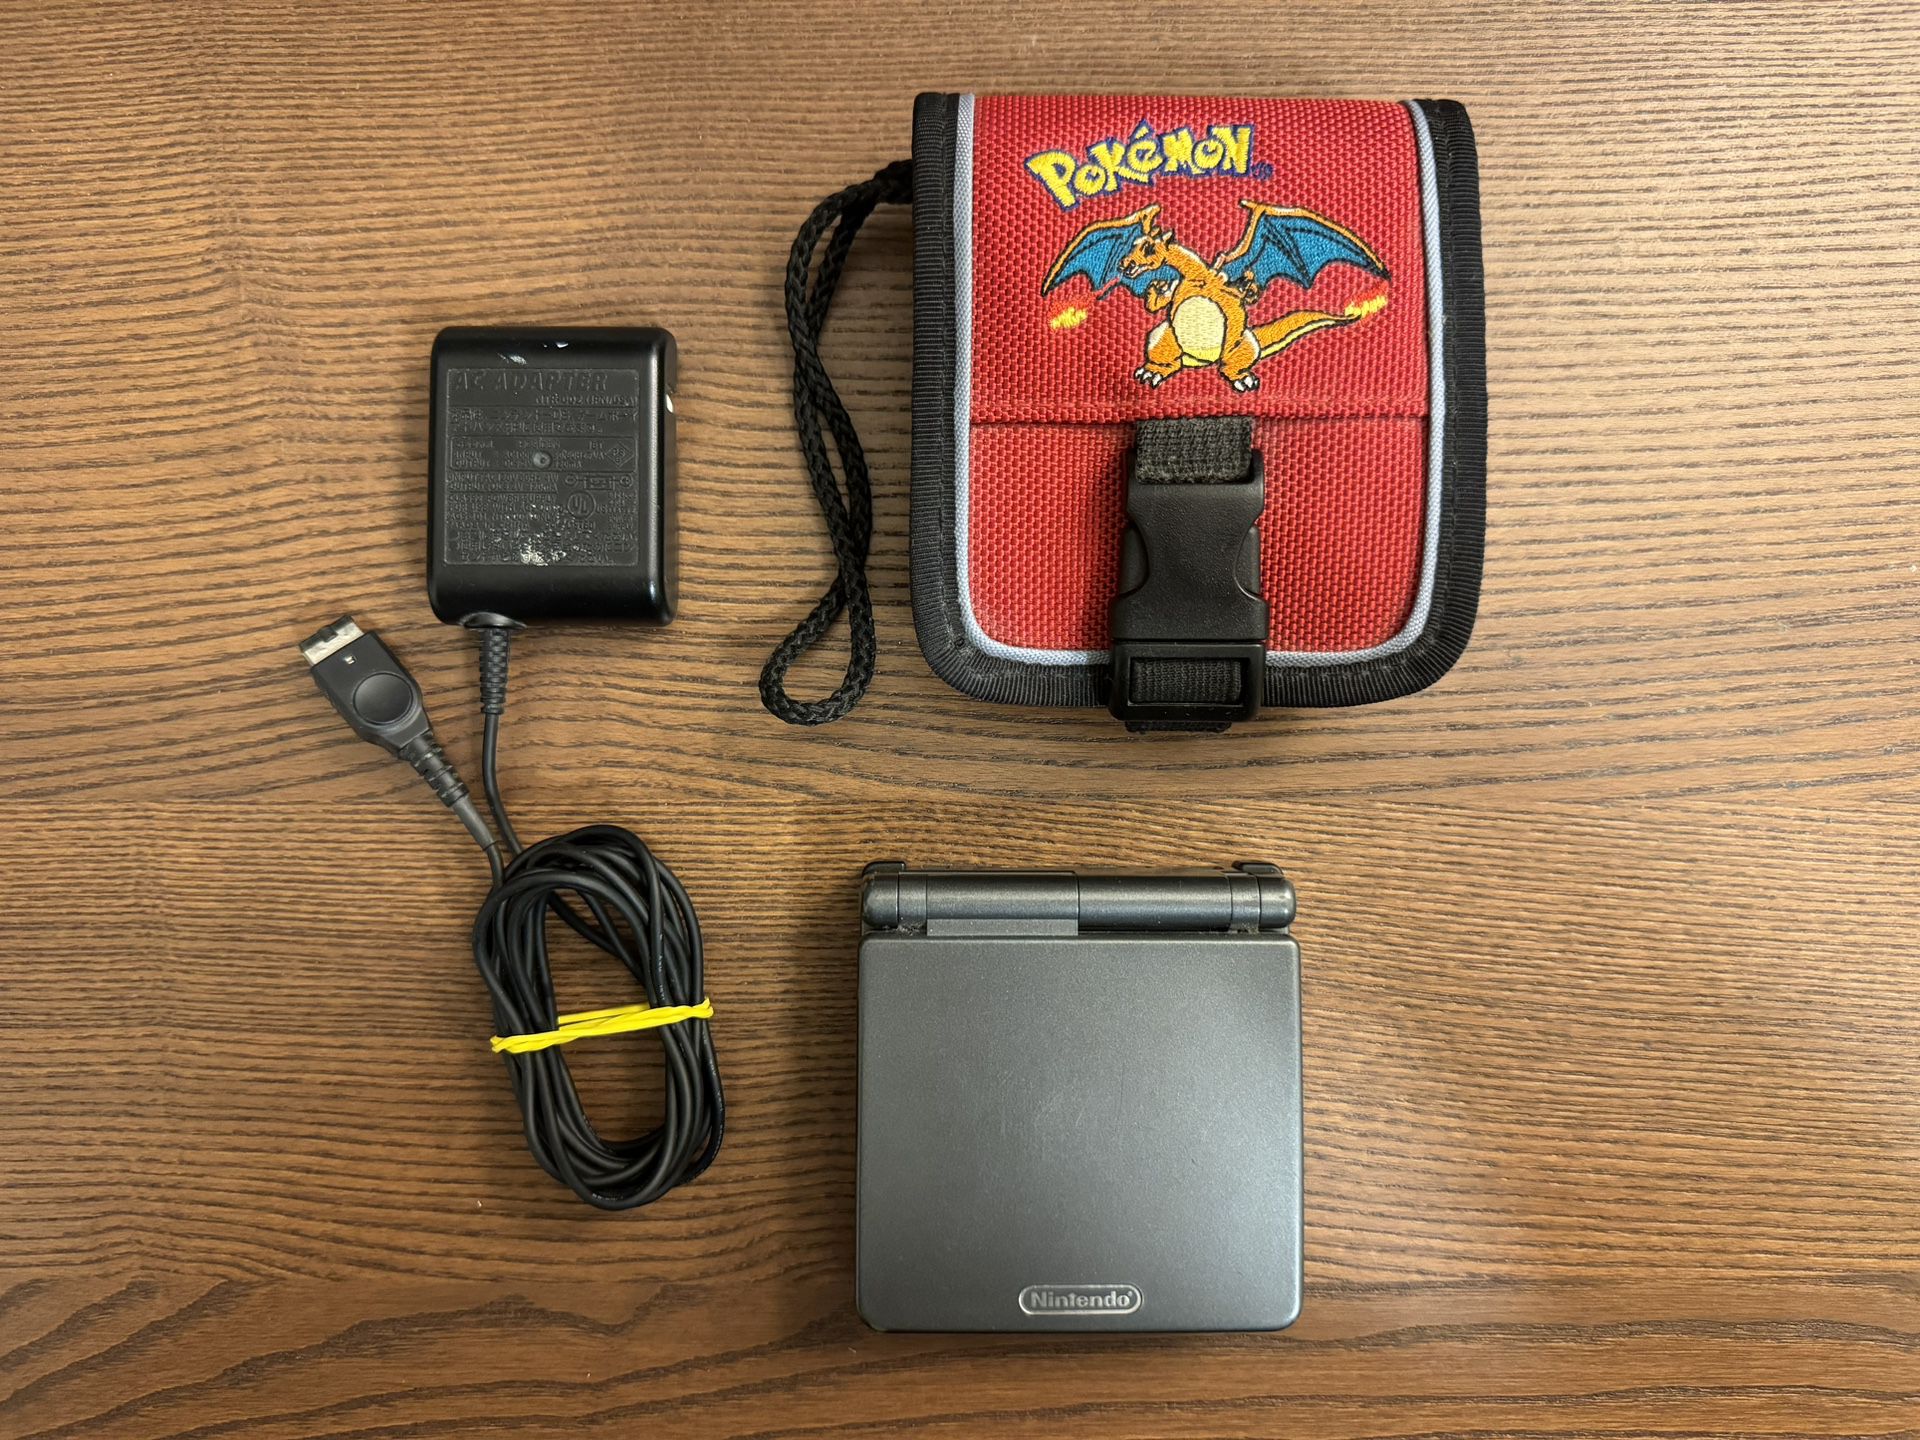 Gameboy Advance SP AGS-101 (Graphite)